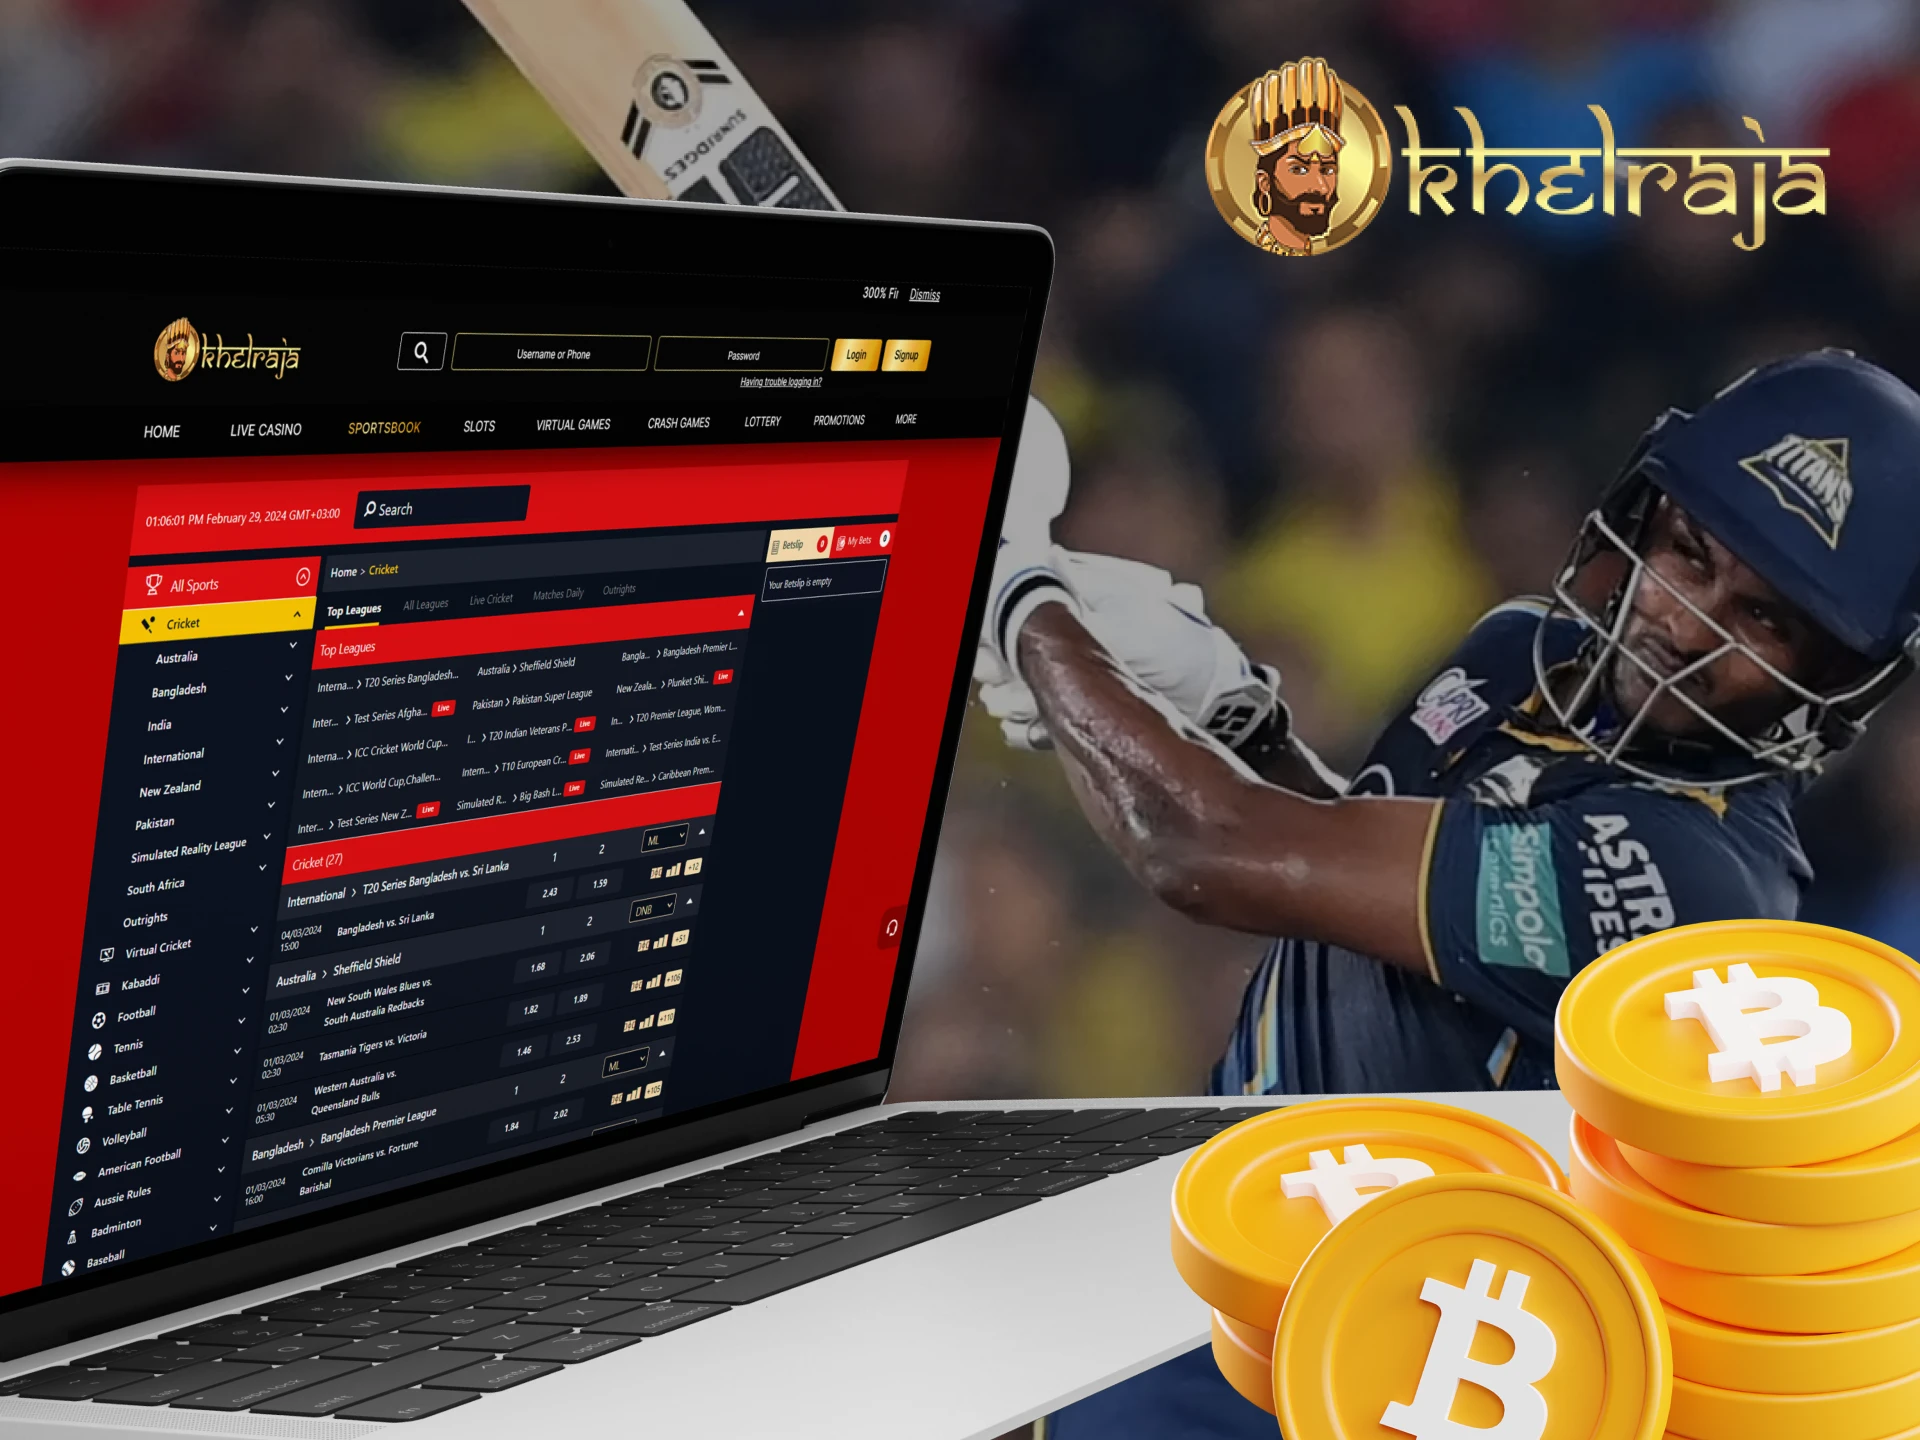 If you are a cricket lover, bet on the sport using cryptocurrency at Khelraja.